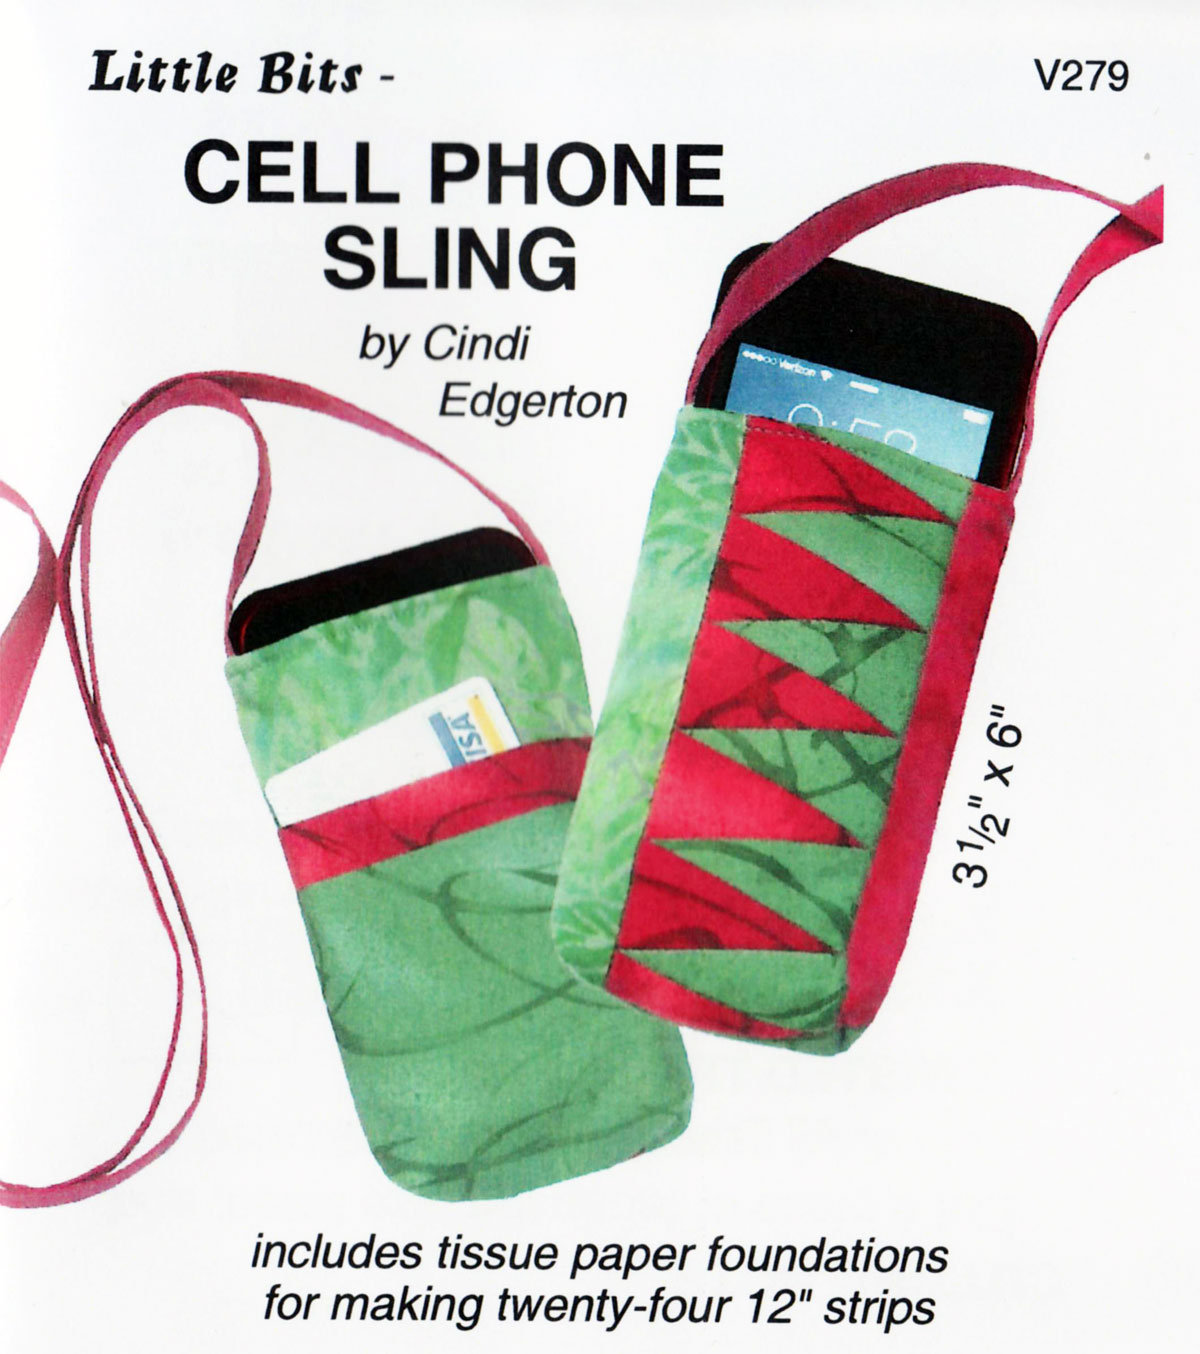 Little-Bits-Cell-Phone-Sling-sewing-pattern-Cindi-Edgerton-front